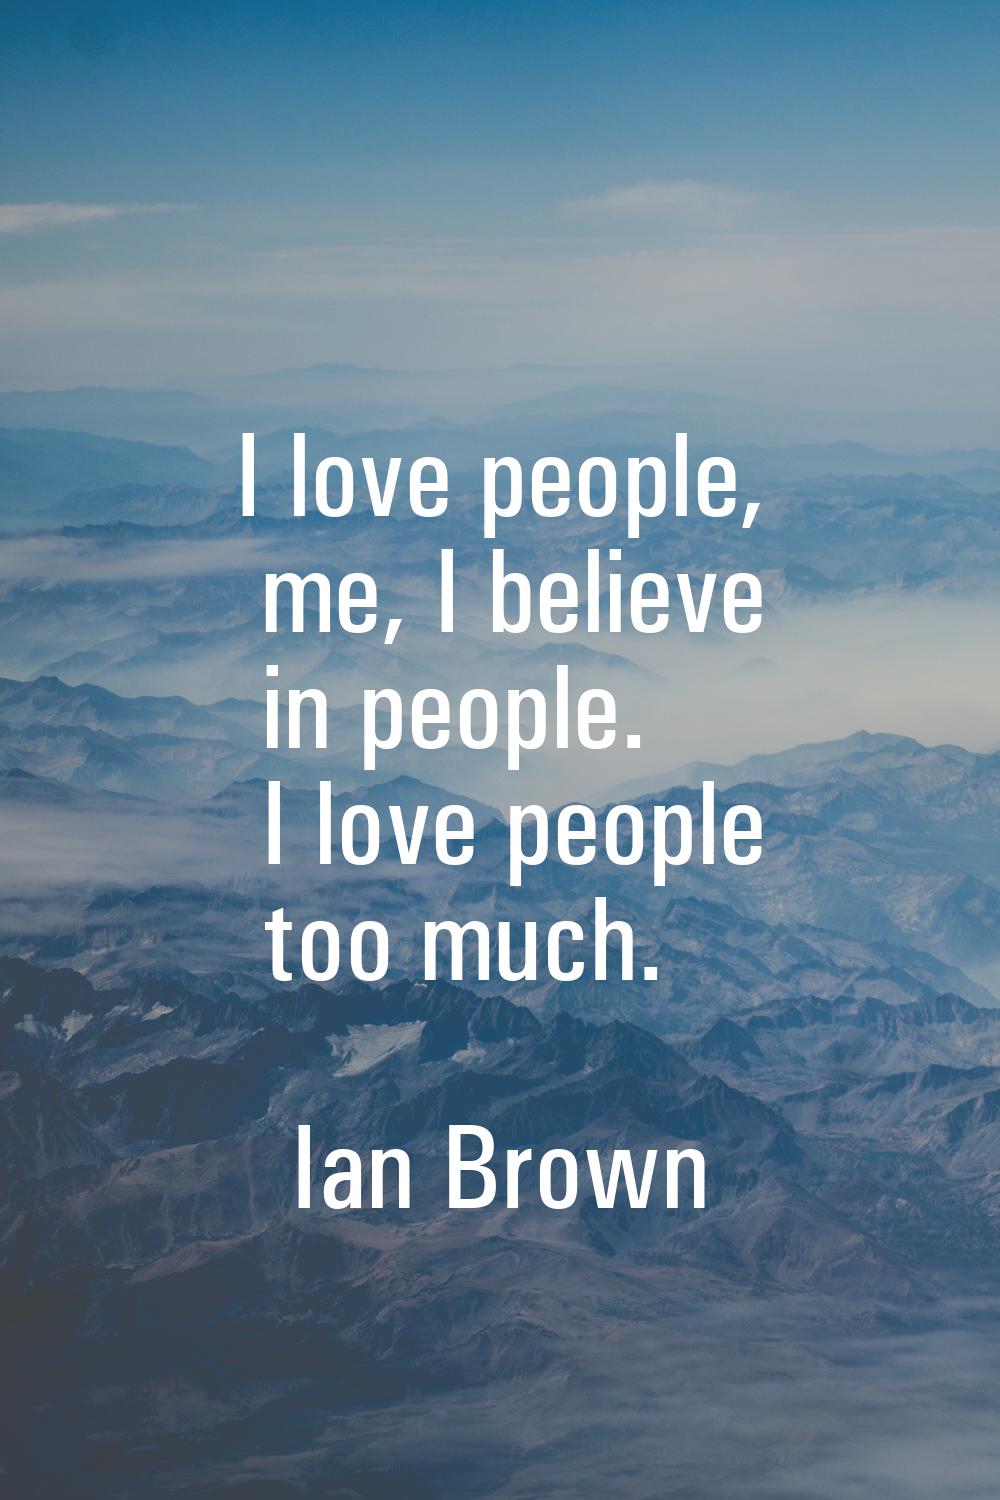 I love people, me, I believe in people. I love people too much.